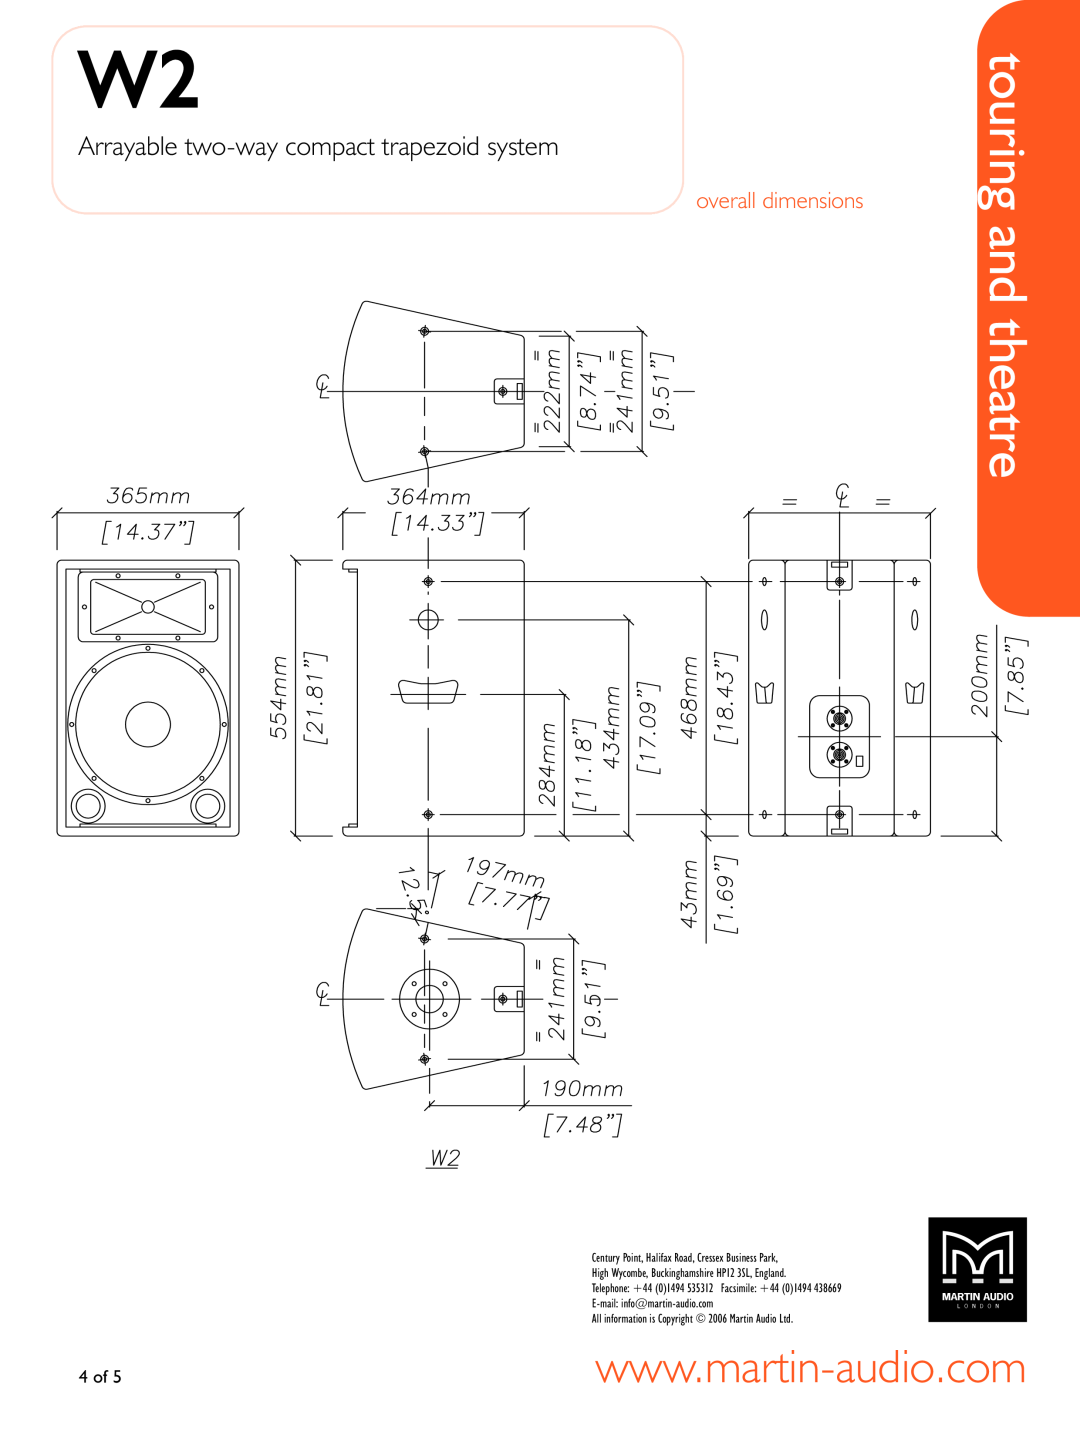 Martin Audio WW22 manual overall dimensions, touring and theatre, Arrayable two-waycompact trapezoid system 